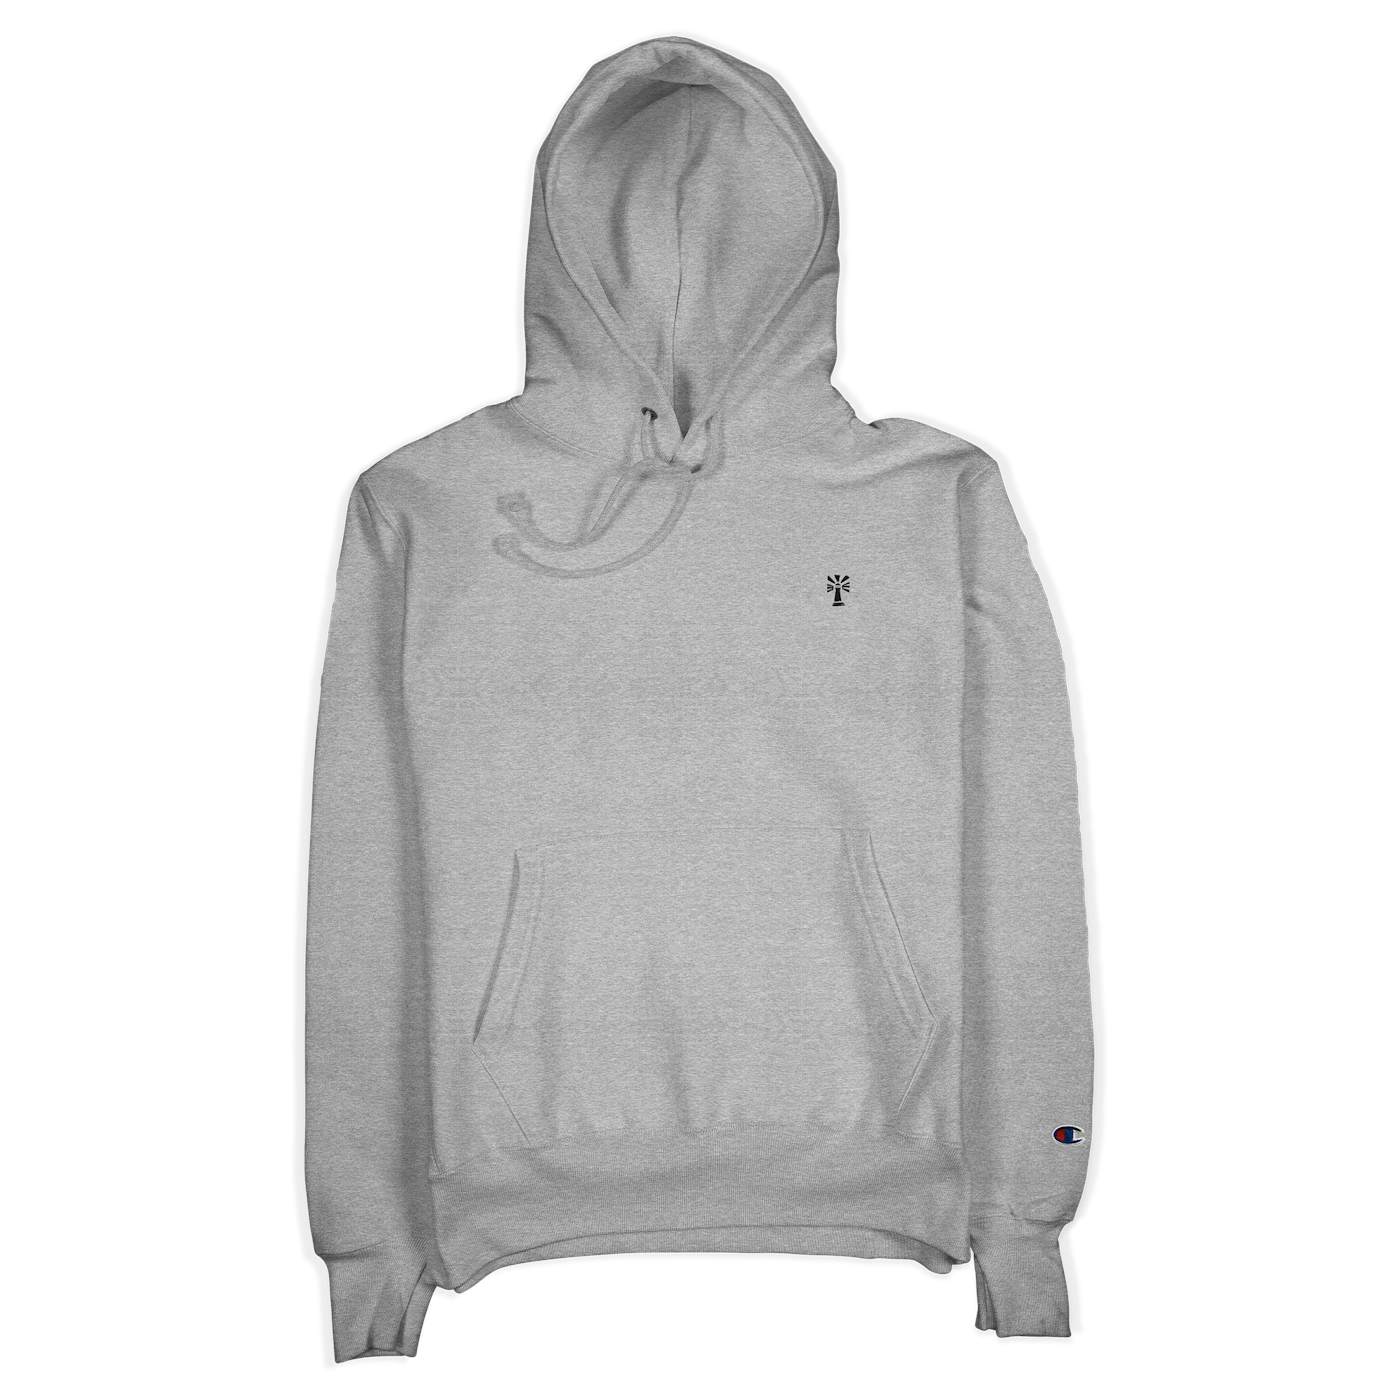 Stray From The Path - Internal Atomics Champion Hoodie (Steel Gray)